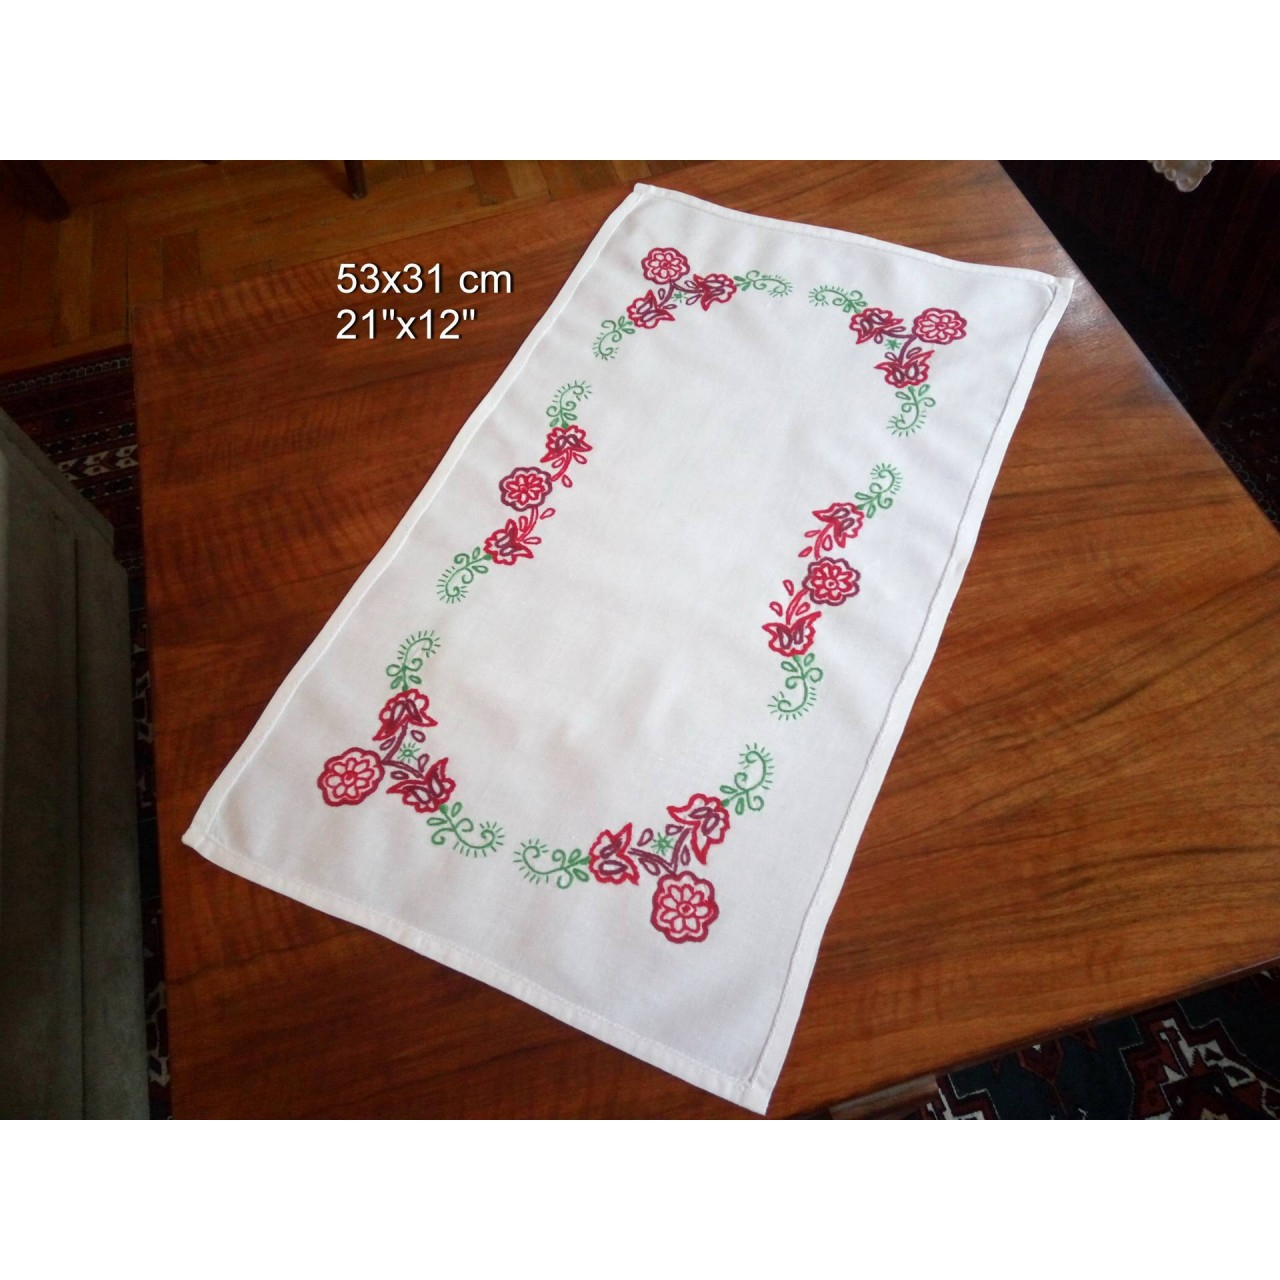 Vintage Floral Embroidery Patterns Embroidered Tablecloth With Kalocsa Floral Motives Kalocsa Runner